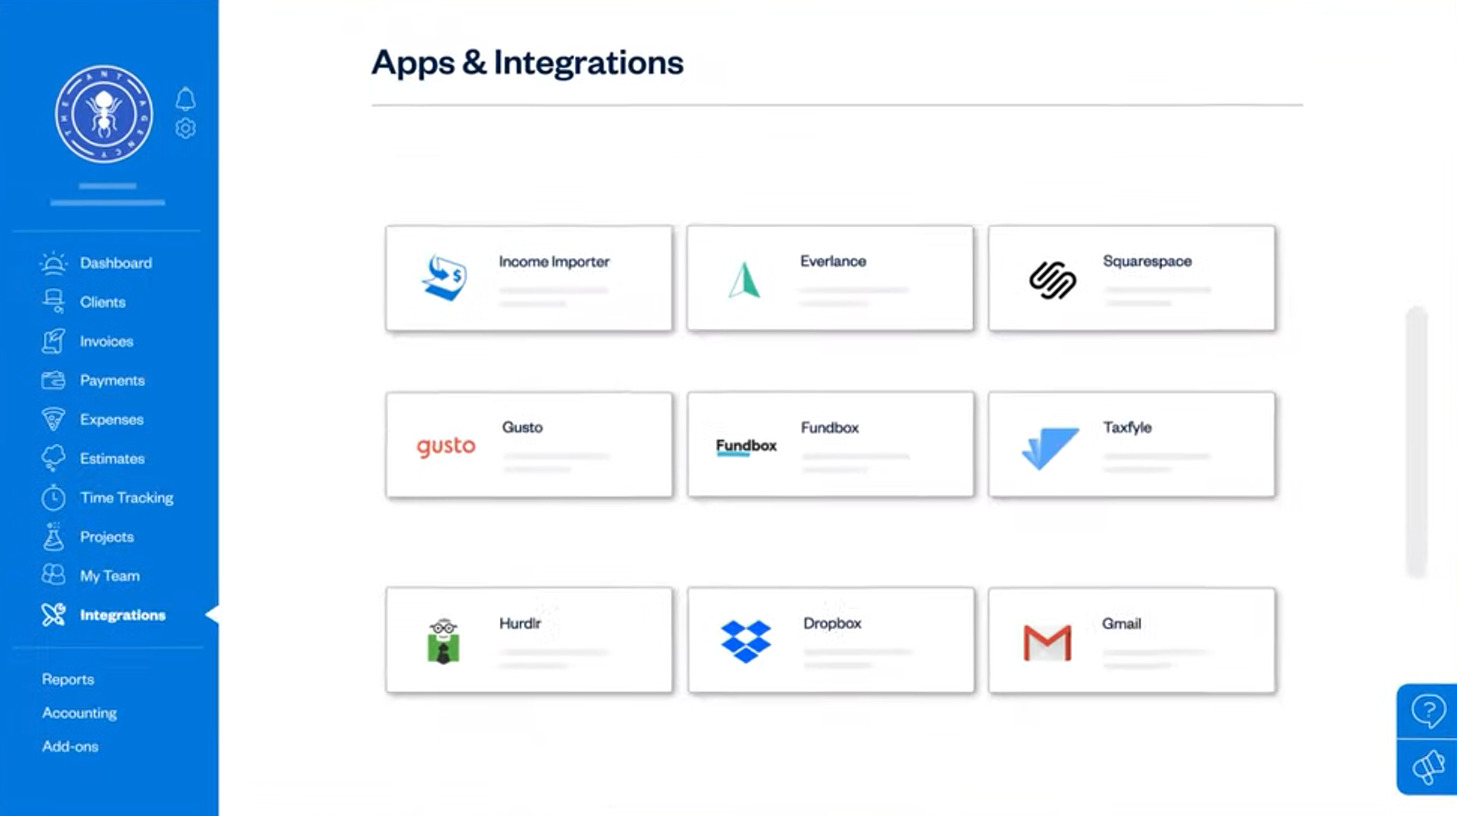 App and Integration